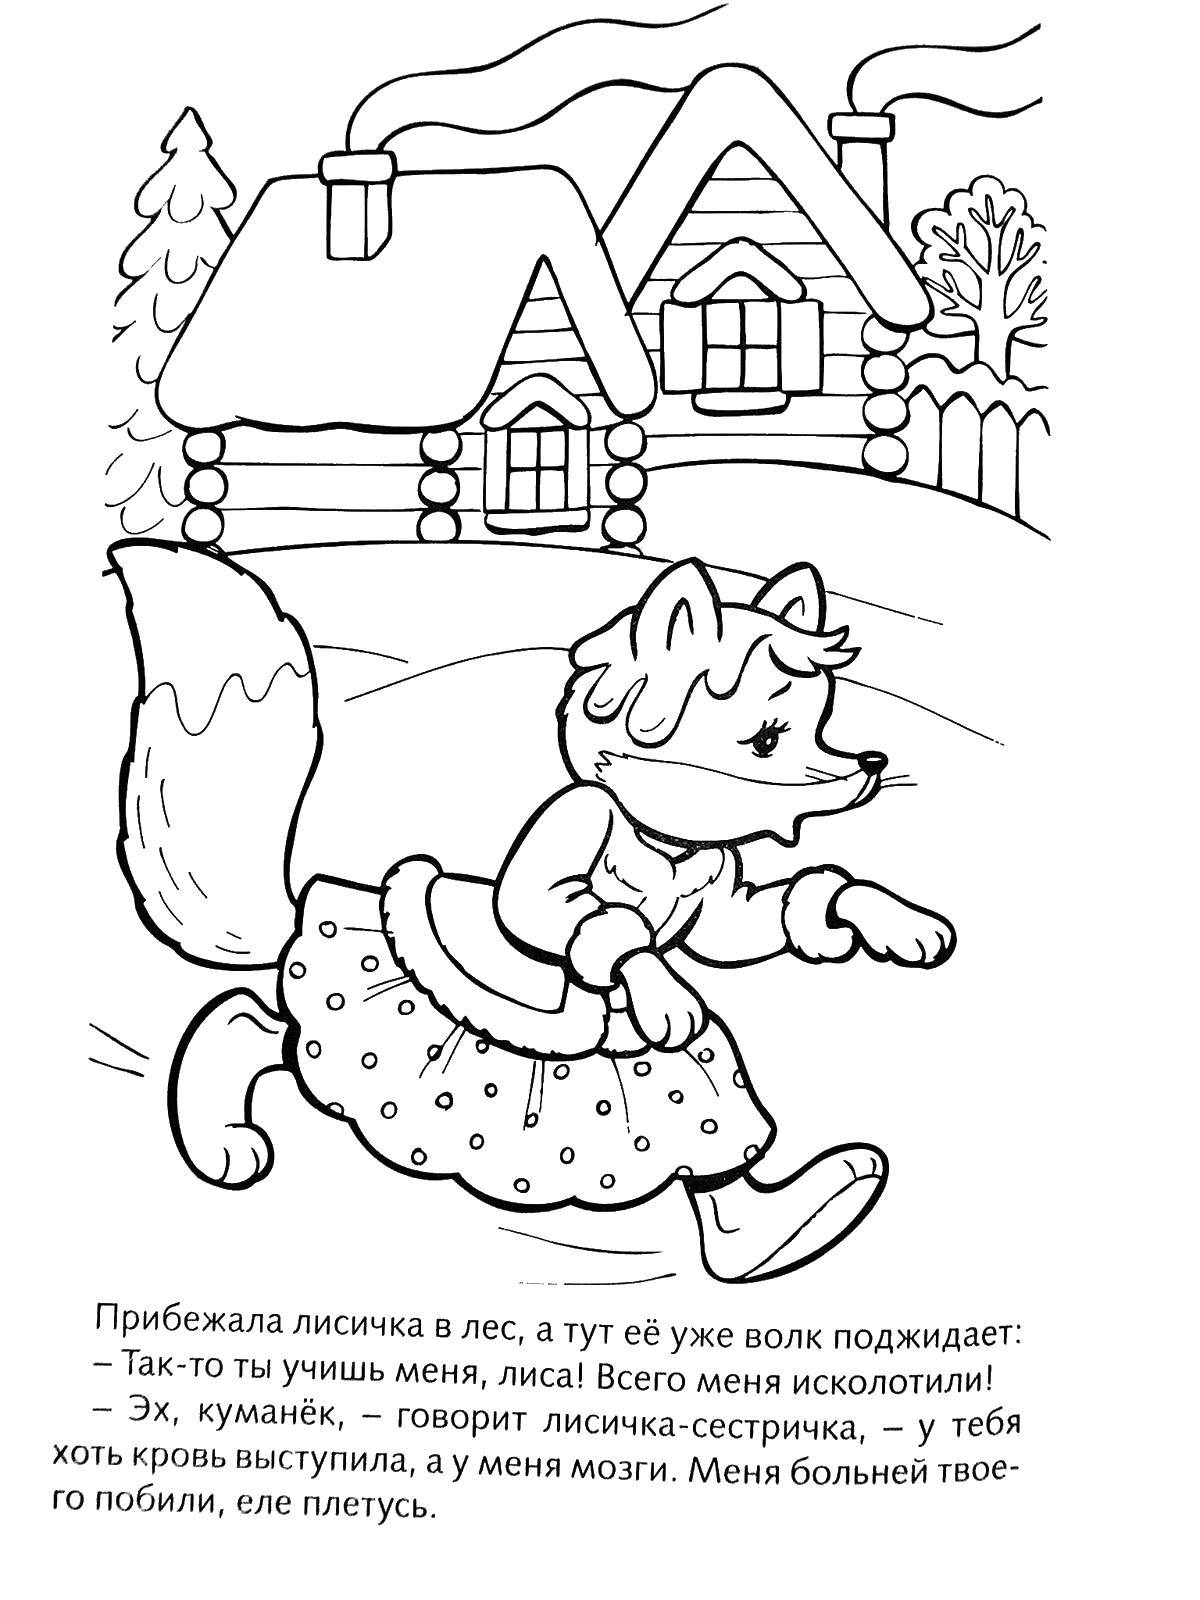 Fox and wolf coloring page